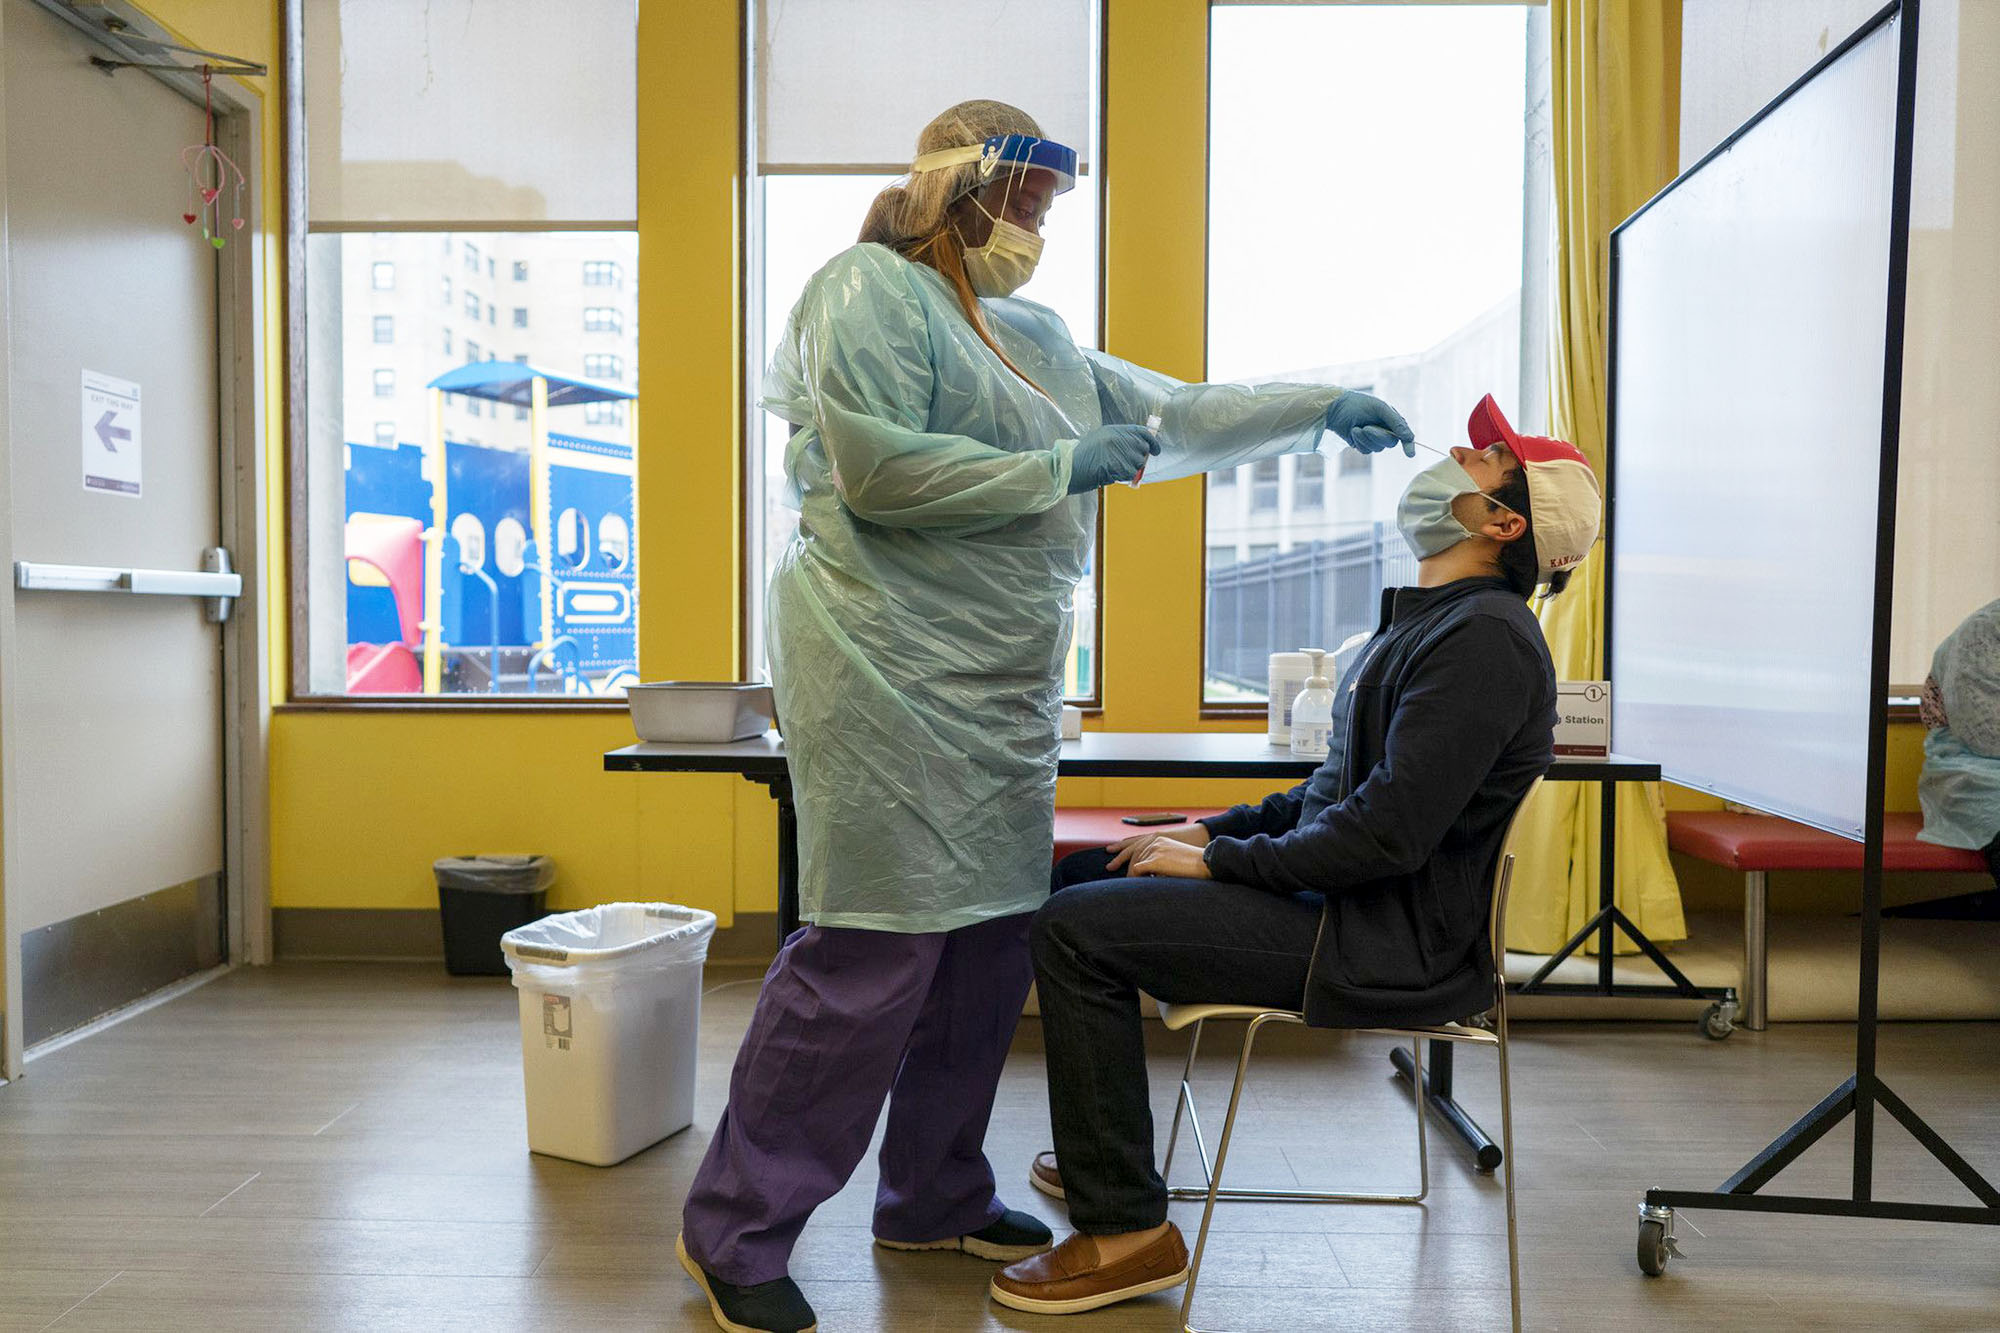 PHOTO: A COVID-19 test is administered to a student at the University of Chicago, Nov. 19, 2020.